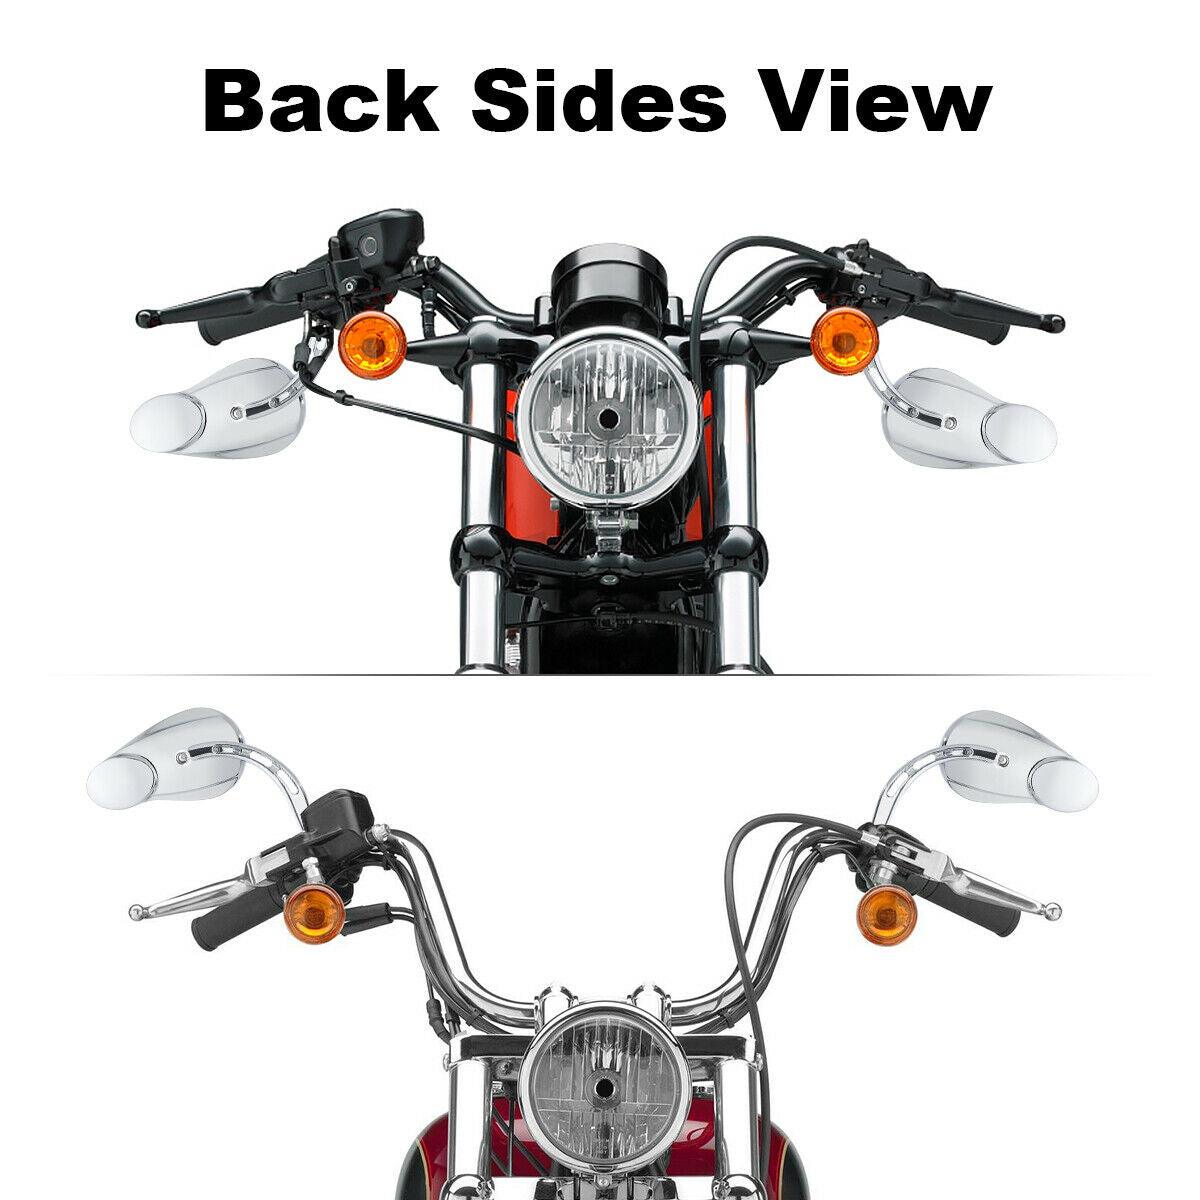 Chrome 8mm Rear View Side Mirrors For Harley Road King Touring XL 883 Sportster - Moto Life Products